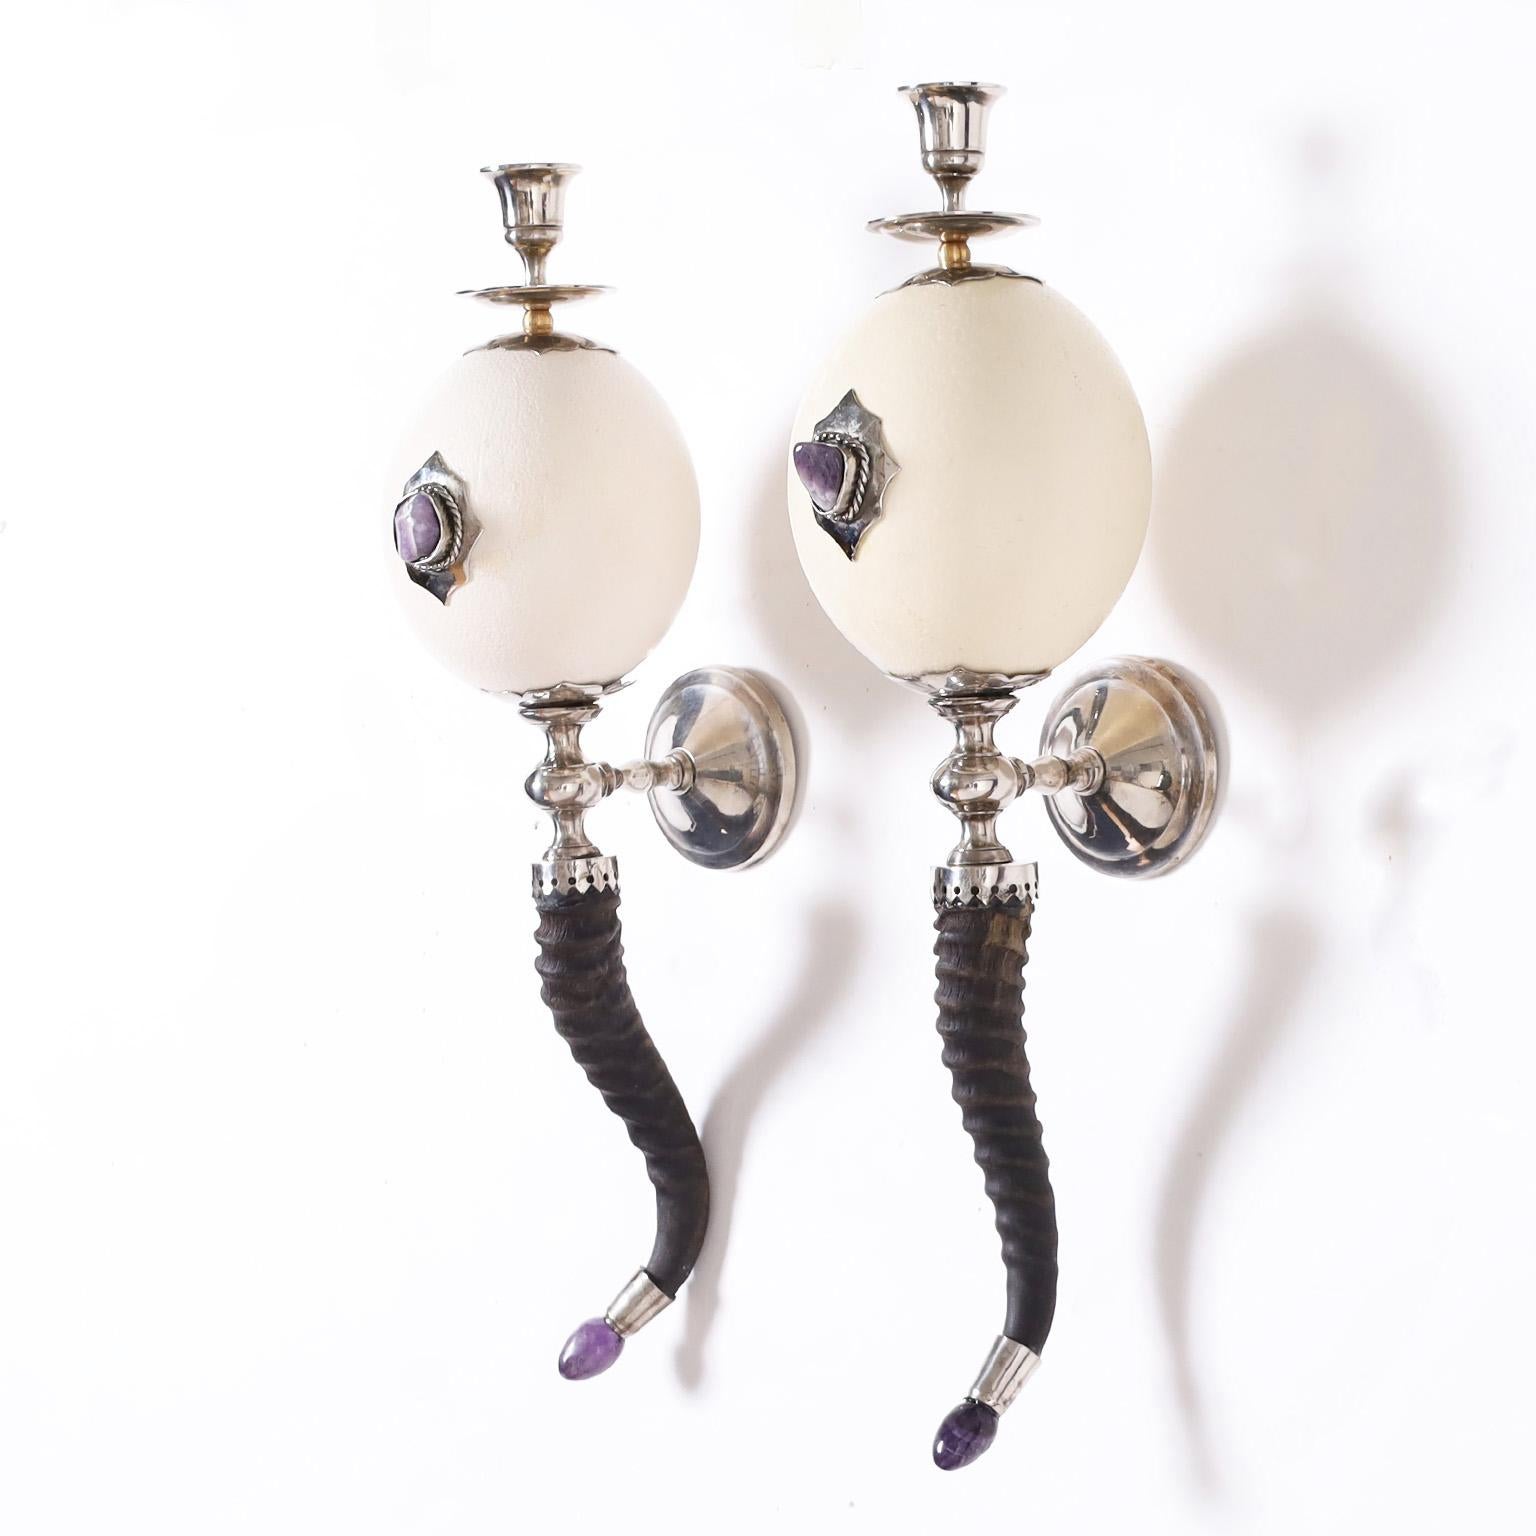 Impressive pair of vintage wall sconces with an eccentric mix of materials featuring ostrich eggs decorated with amethyst stones, antelope horns, and amethyst stone finials. Signed Redmile London.